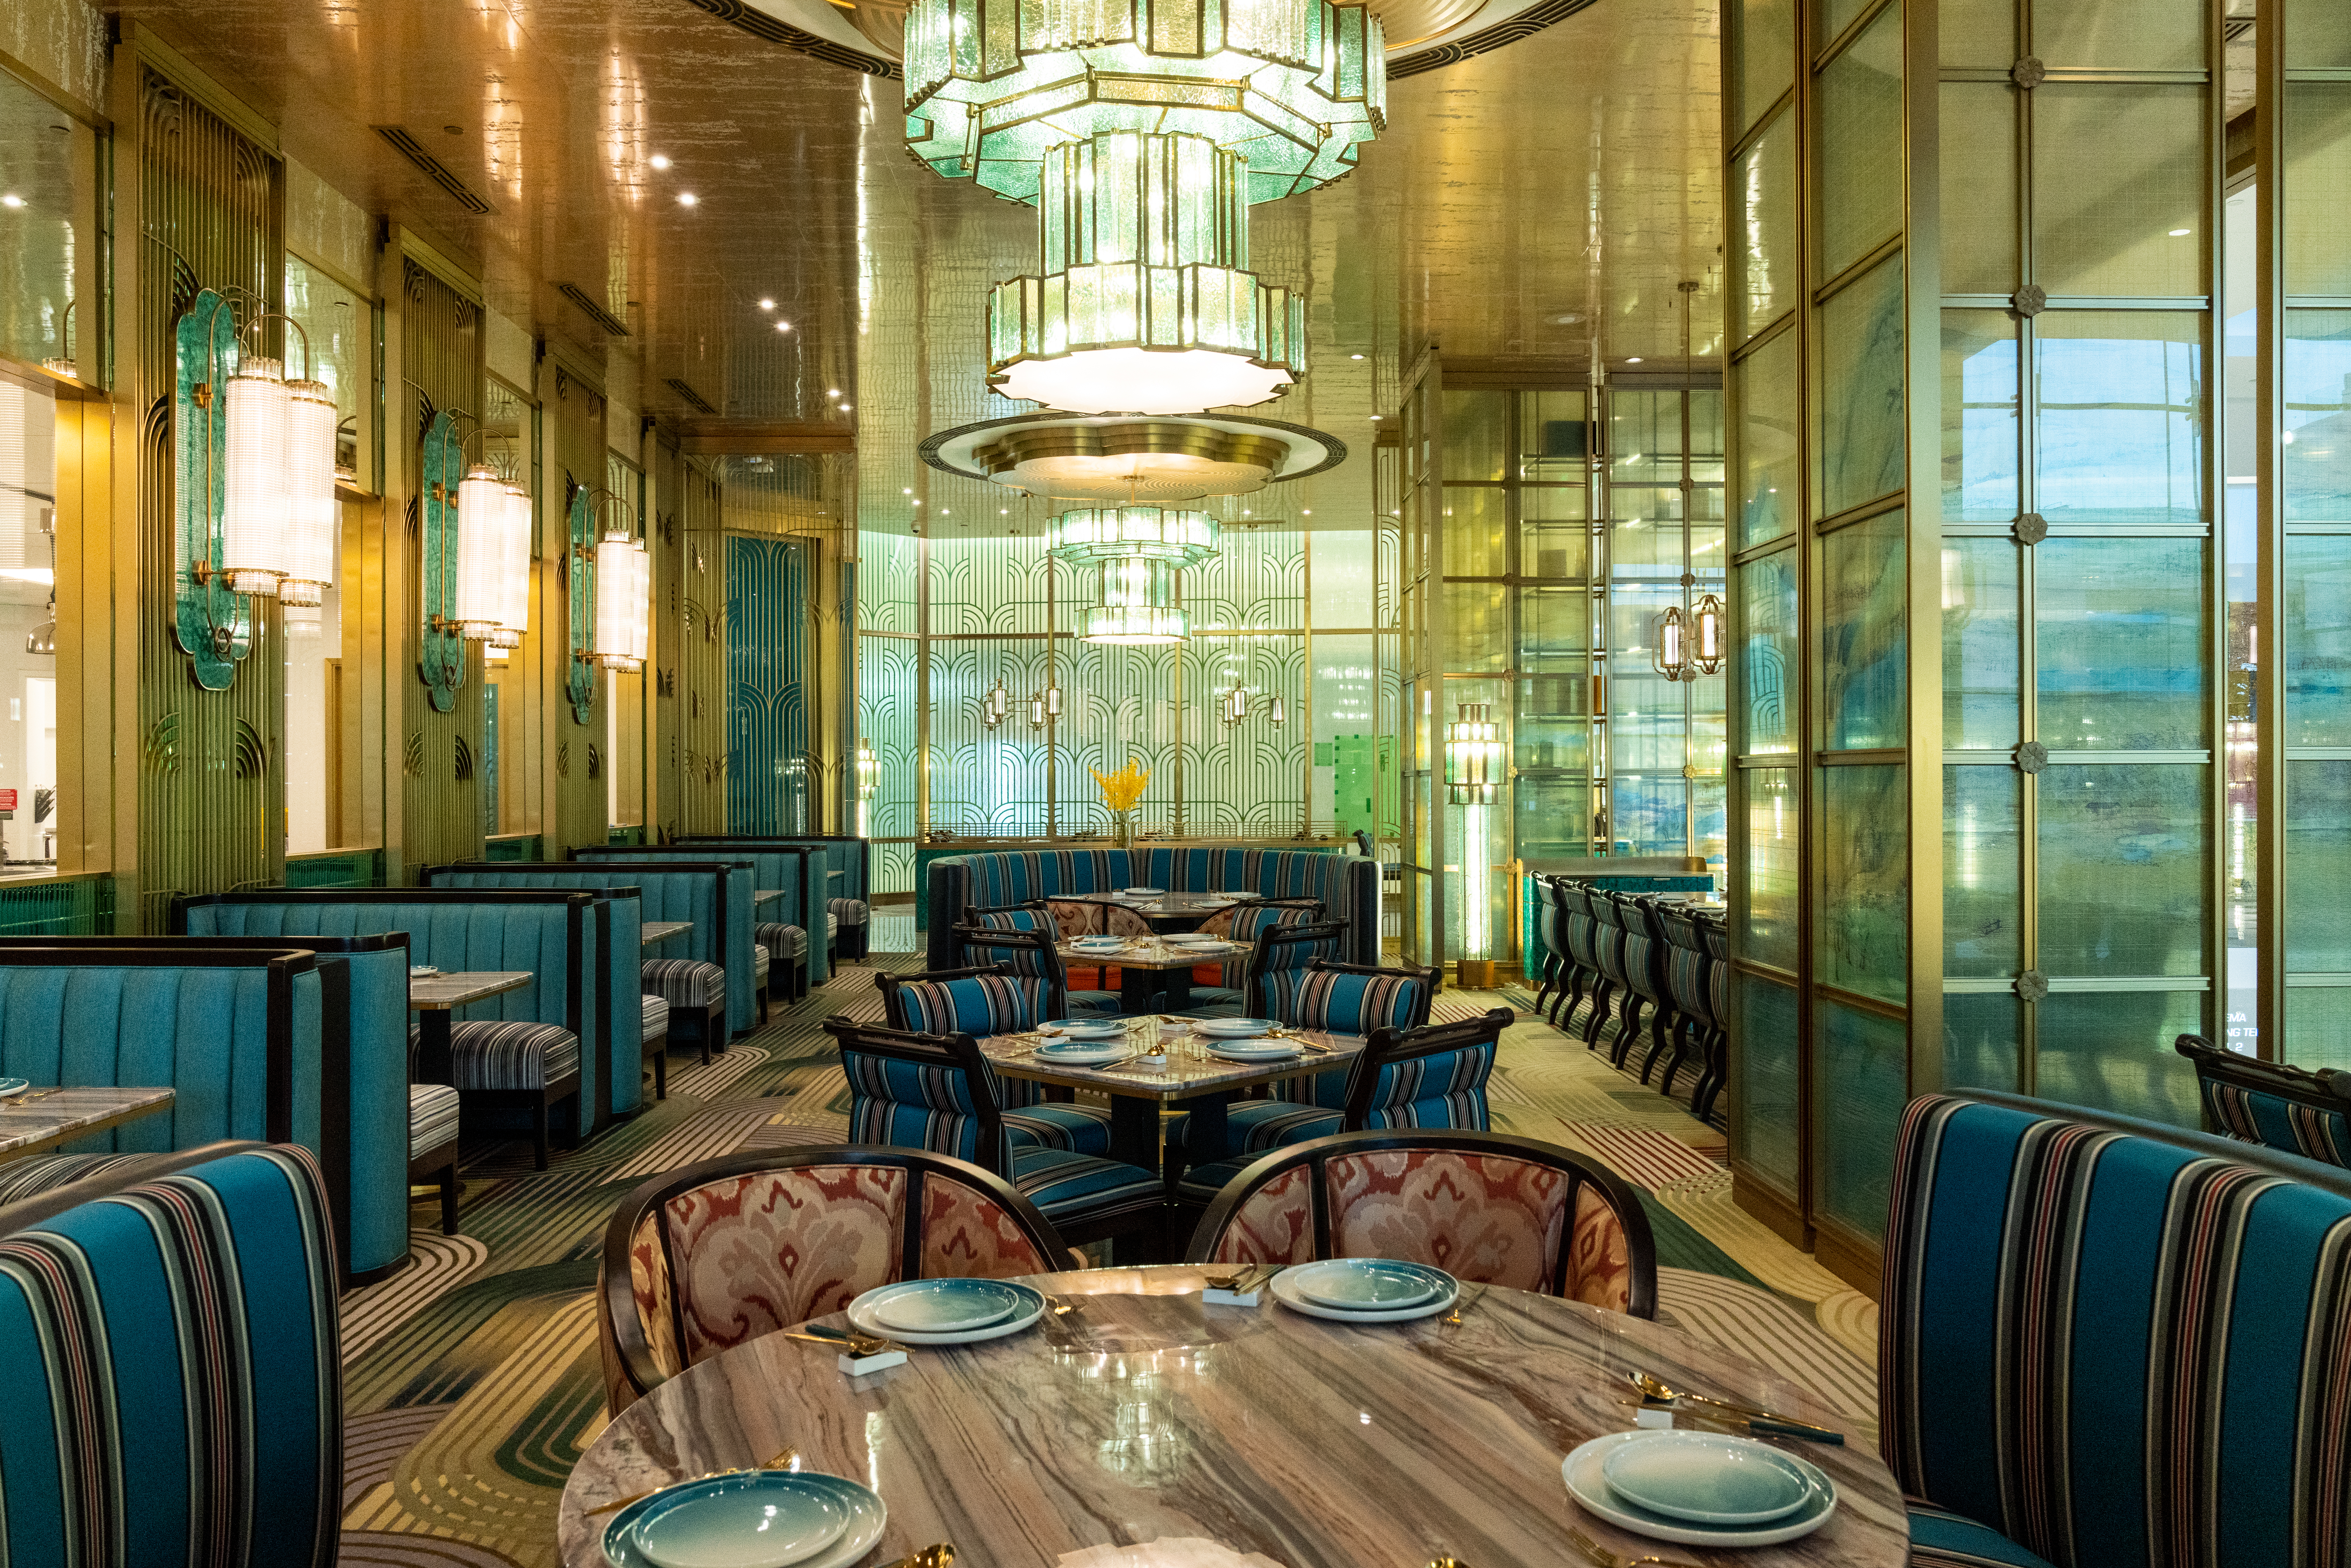 An opulent dining room with high ceilings, modern chandeliers, and blue booths.